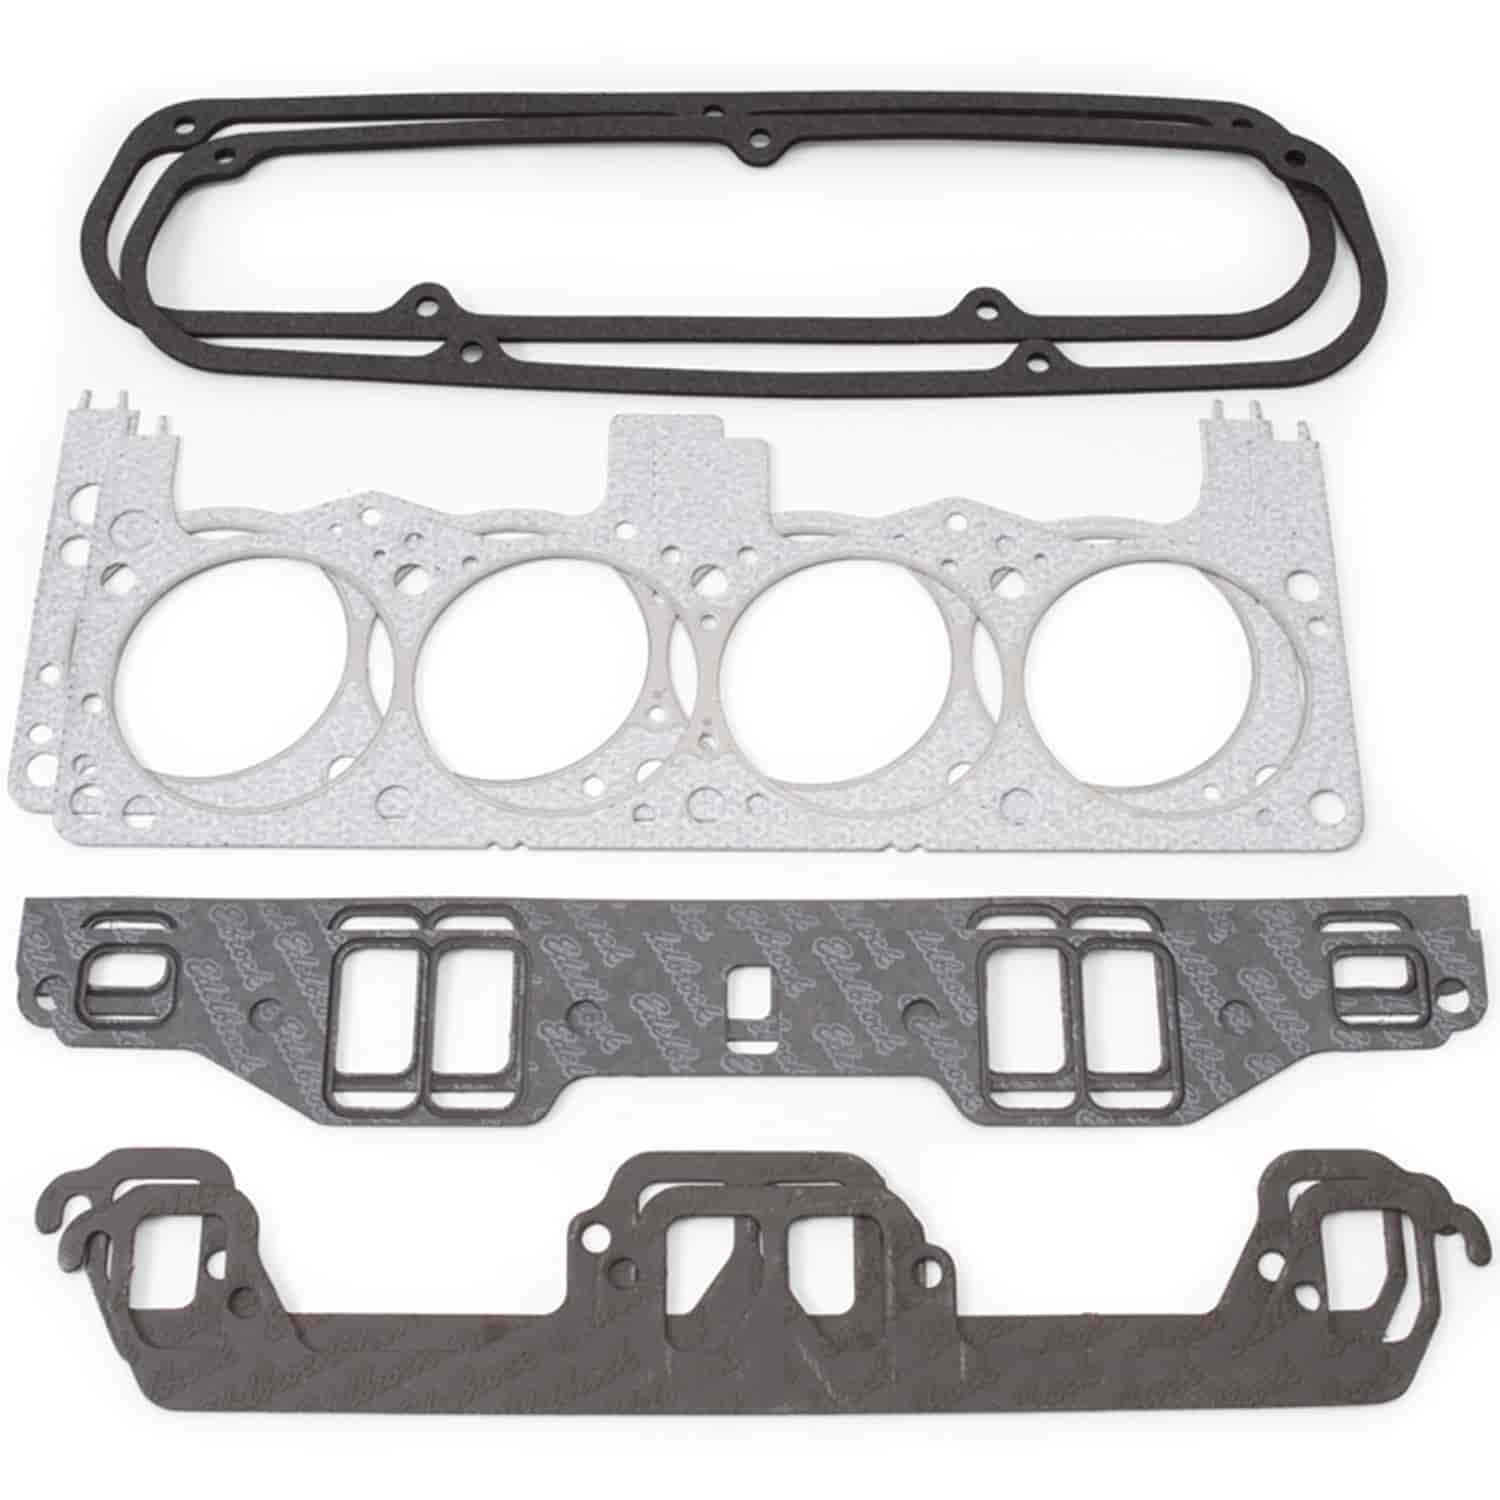 Complete Head Gasket Set for Small Block Chrysler